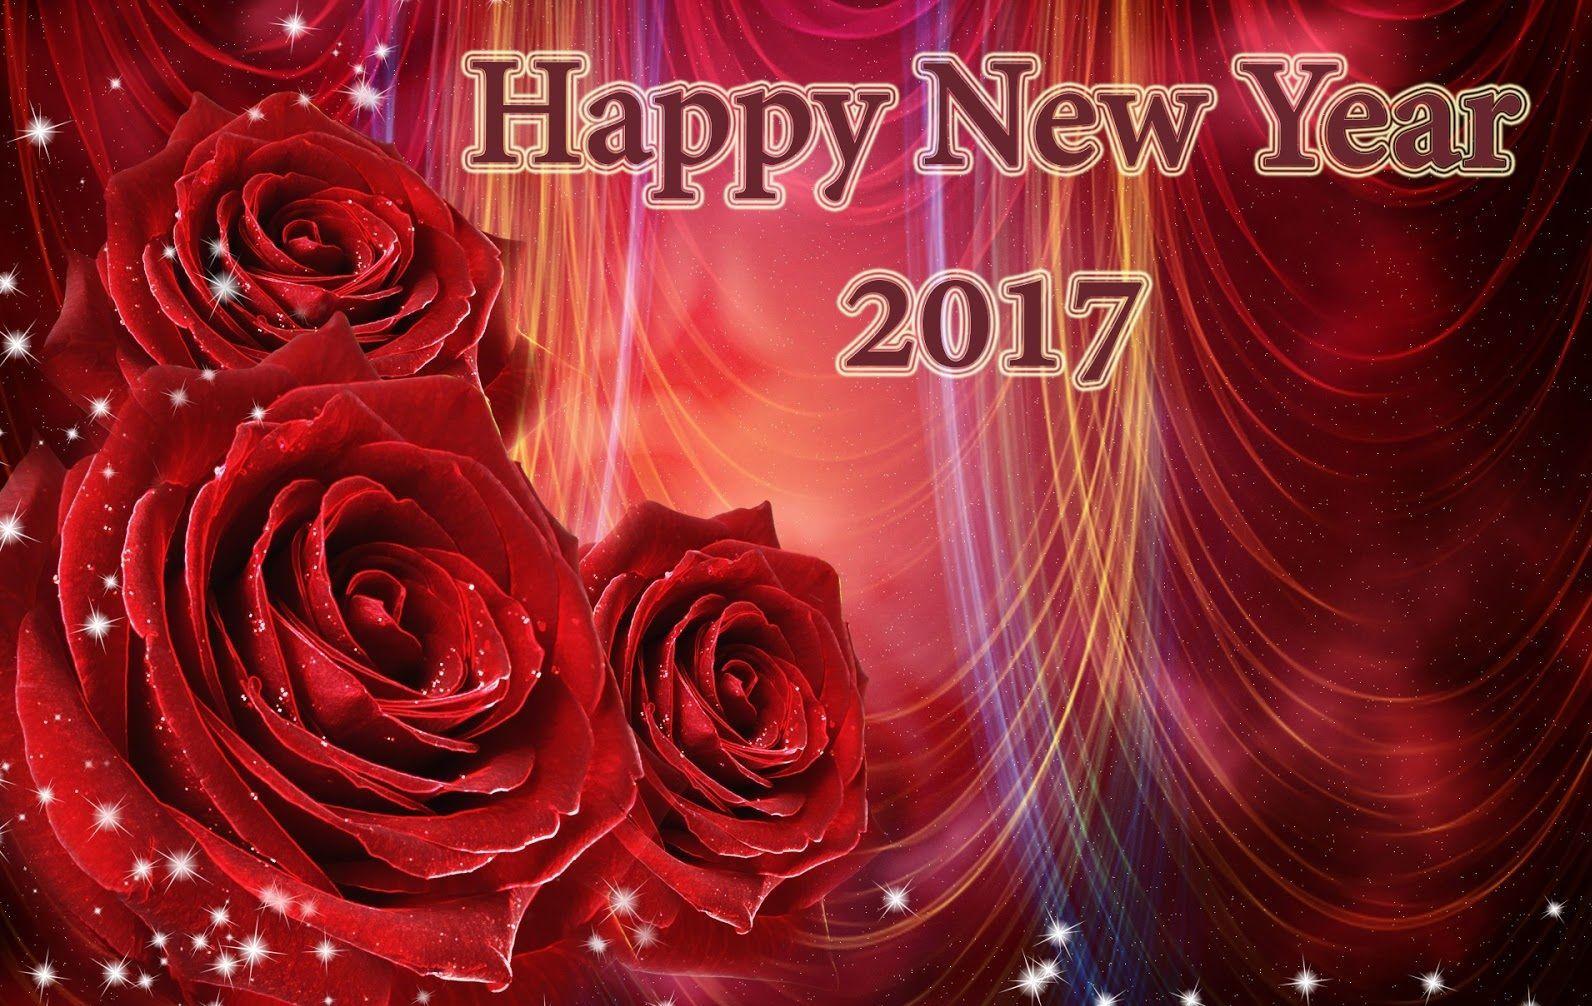 New Year HD Wallpaper 2017 New Year 2017. Happy New Year